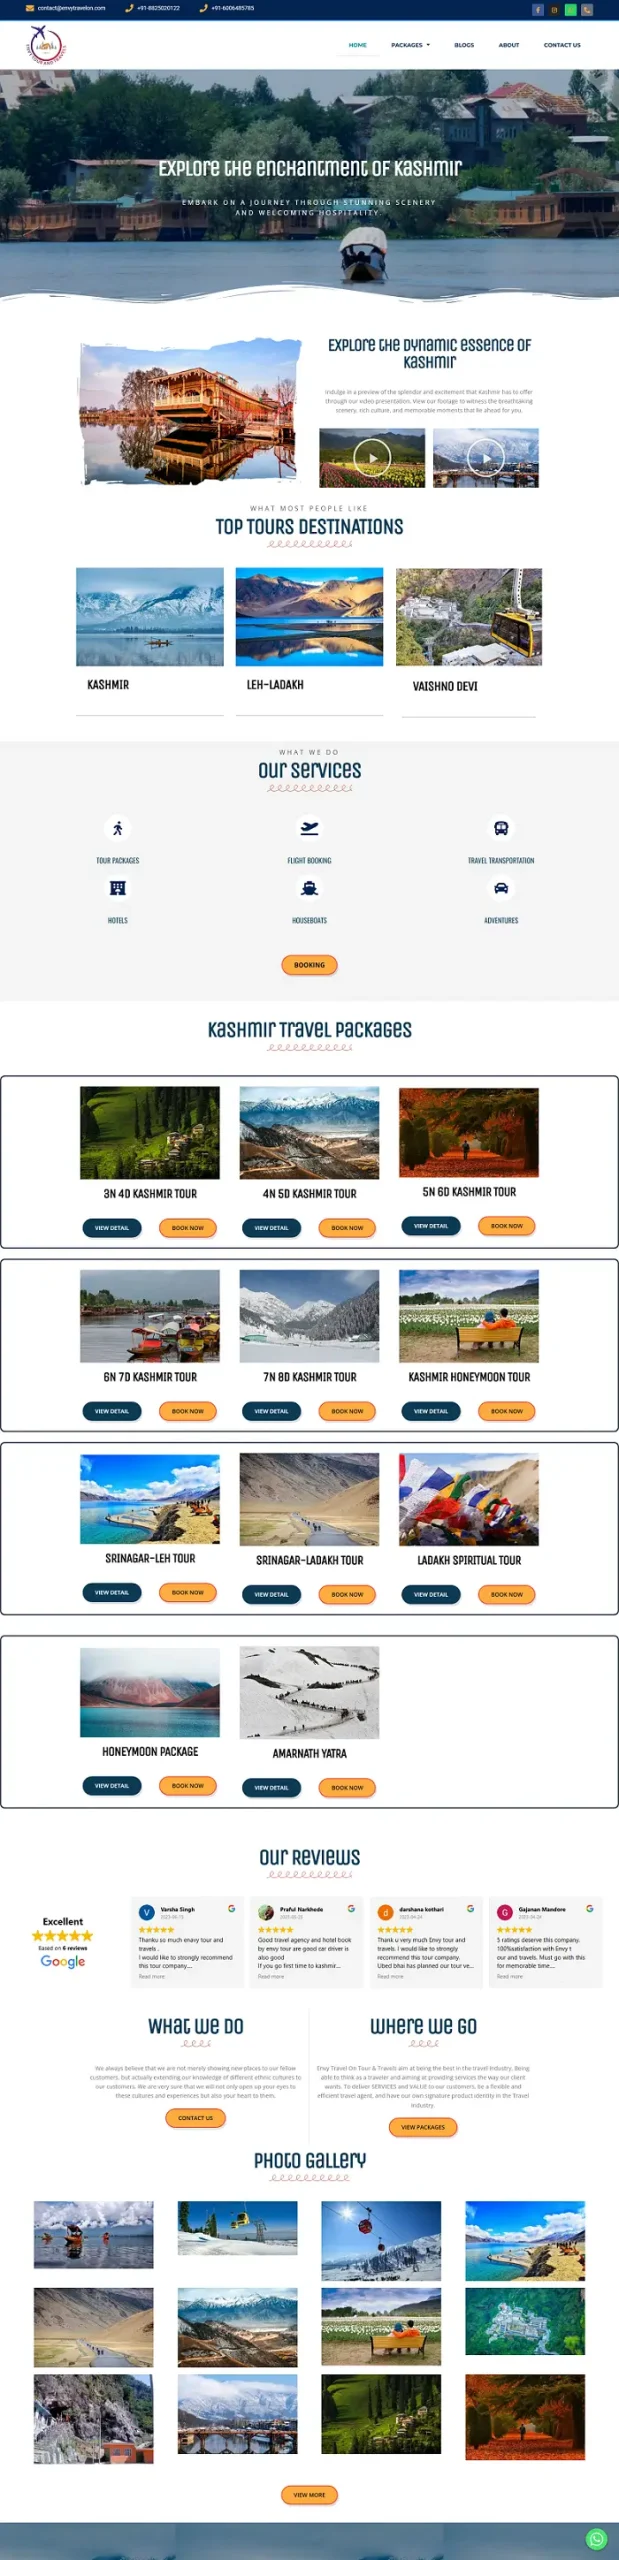 Website made by shakir baba on envy travel on